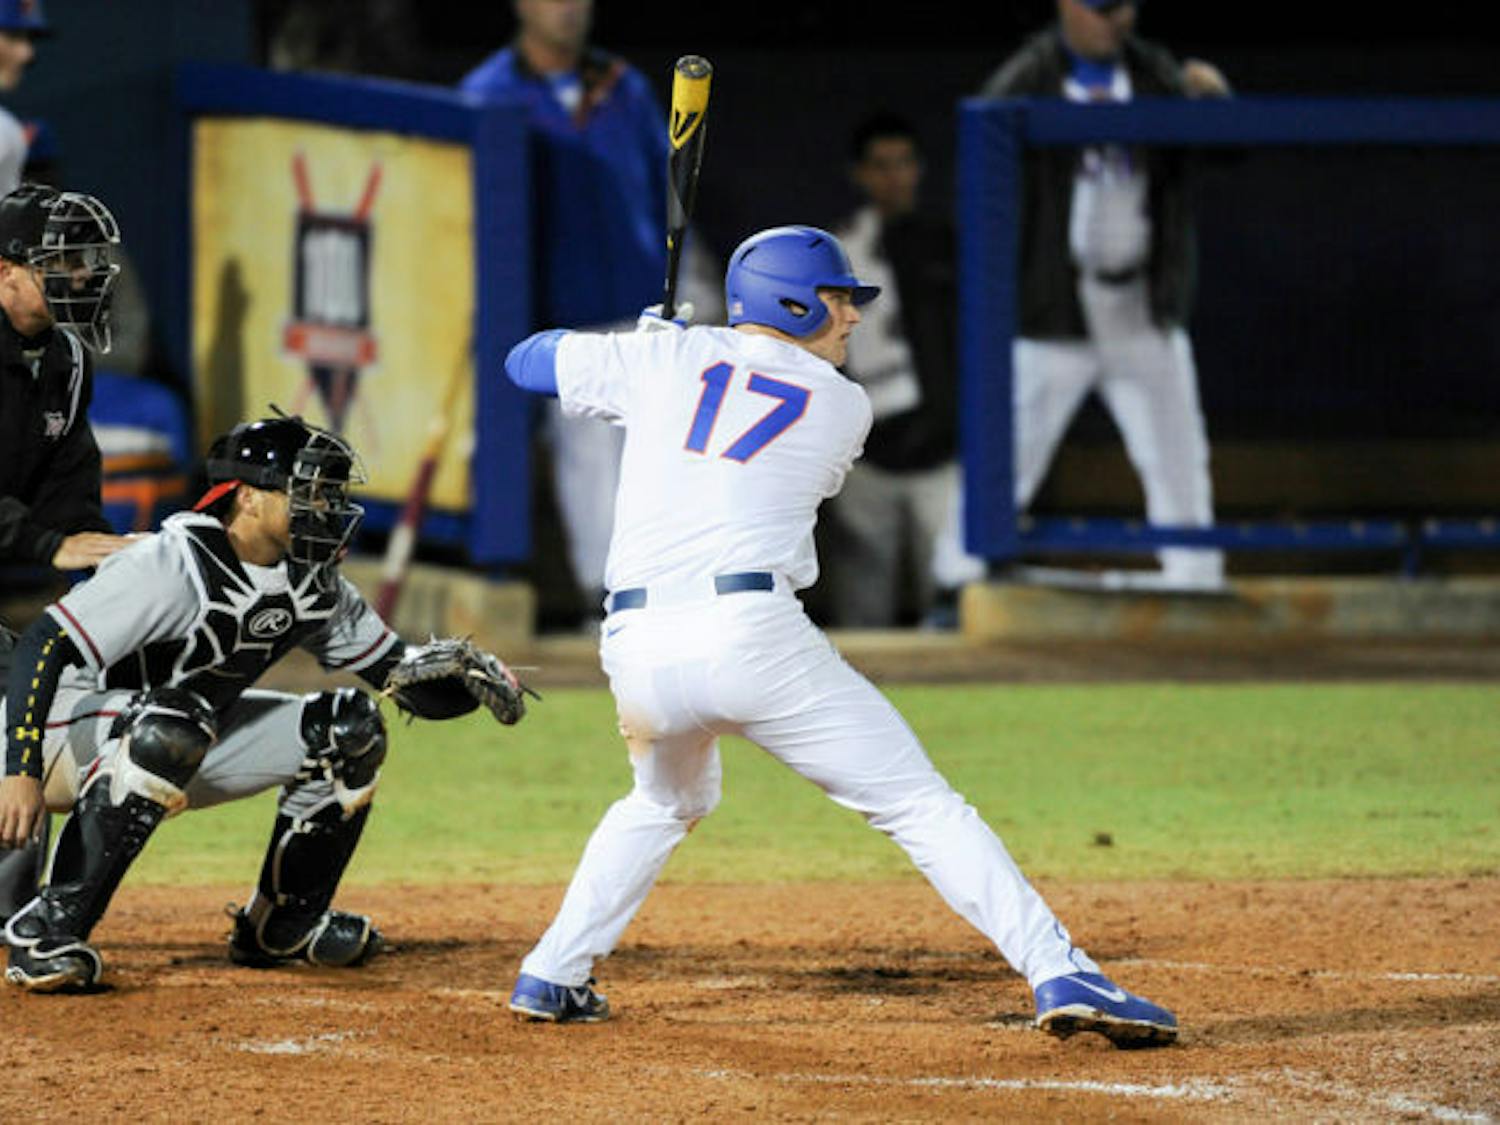 Taylor Gushue bats during Florida’s 4-0 win against Maryland on Feb. 14 at McKethan Stadium. Gushue leads Florida with one home run and nine RBIs through the Gators’ first eight games.